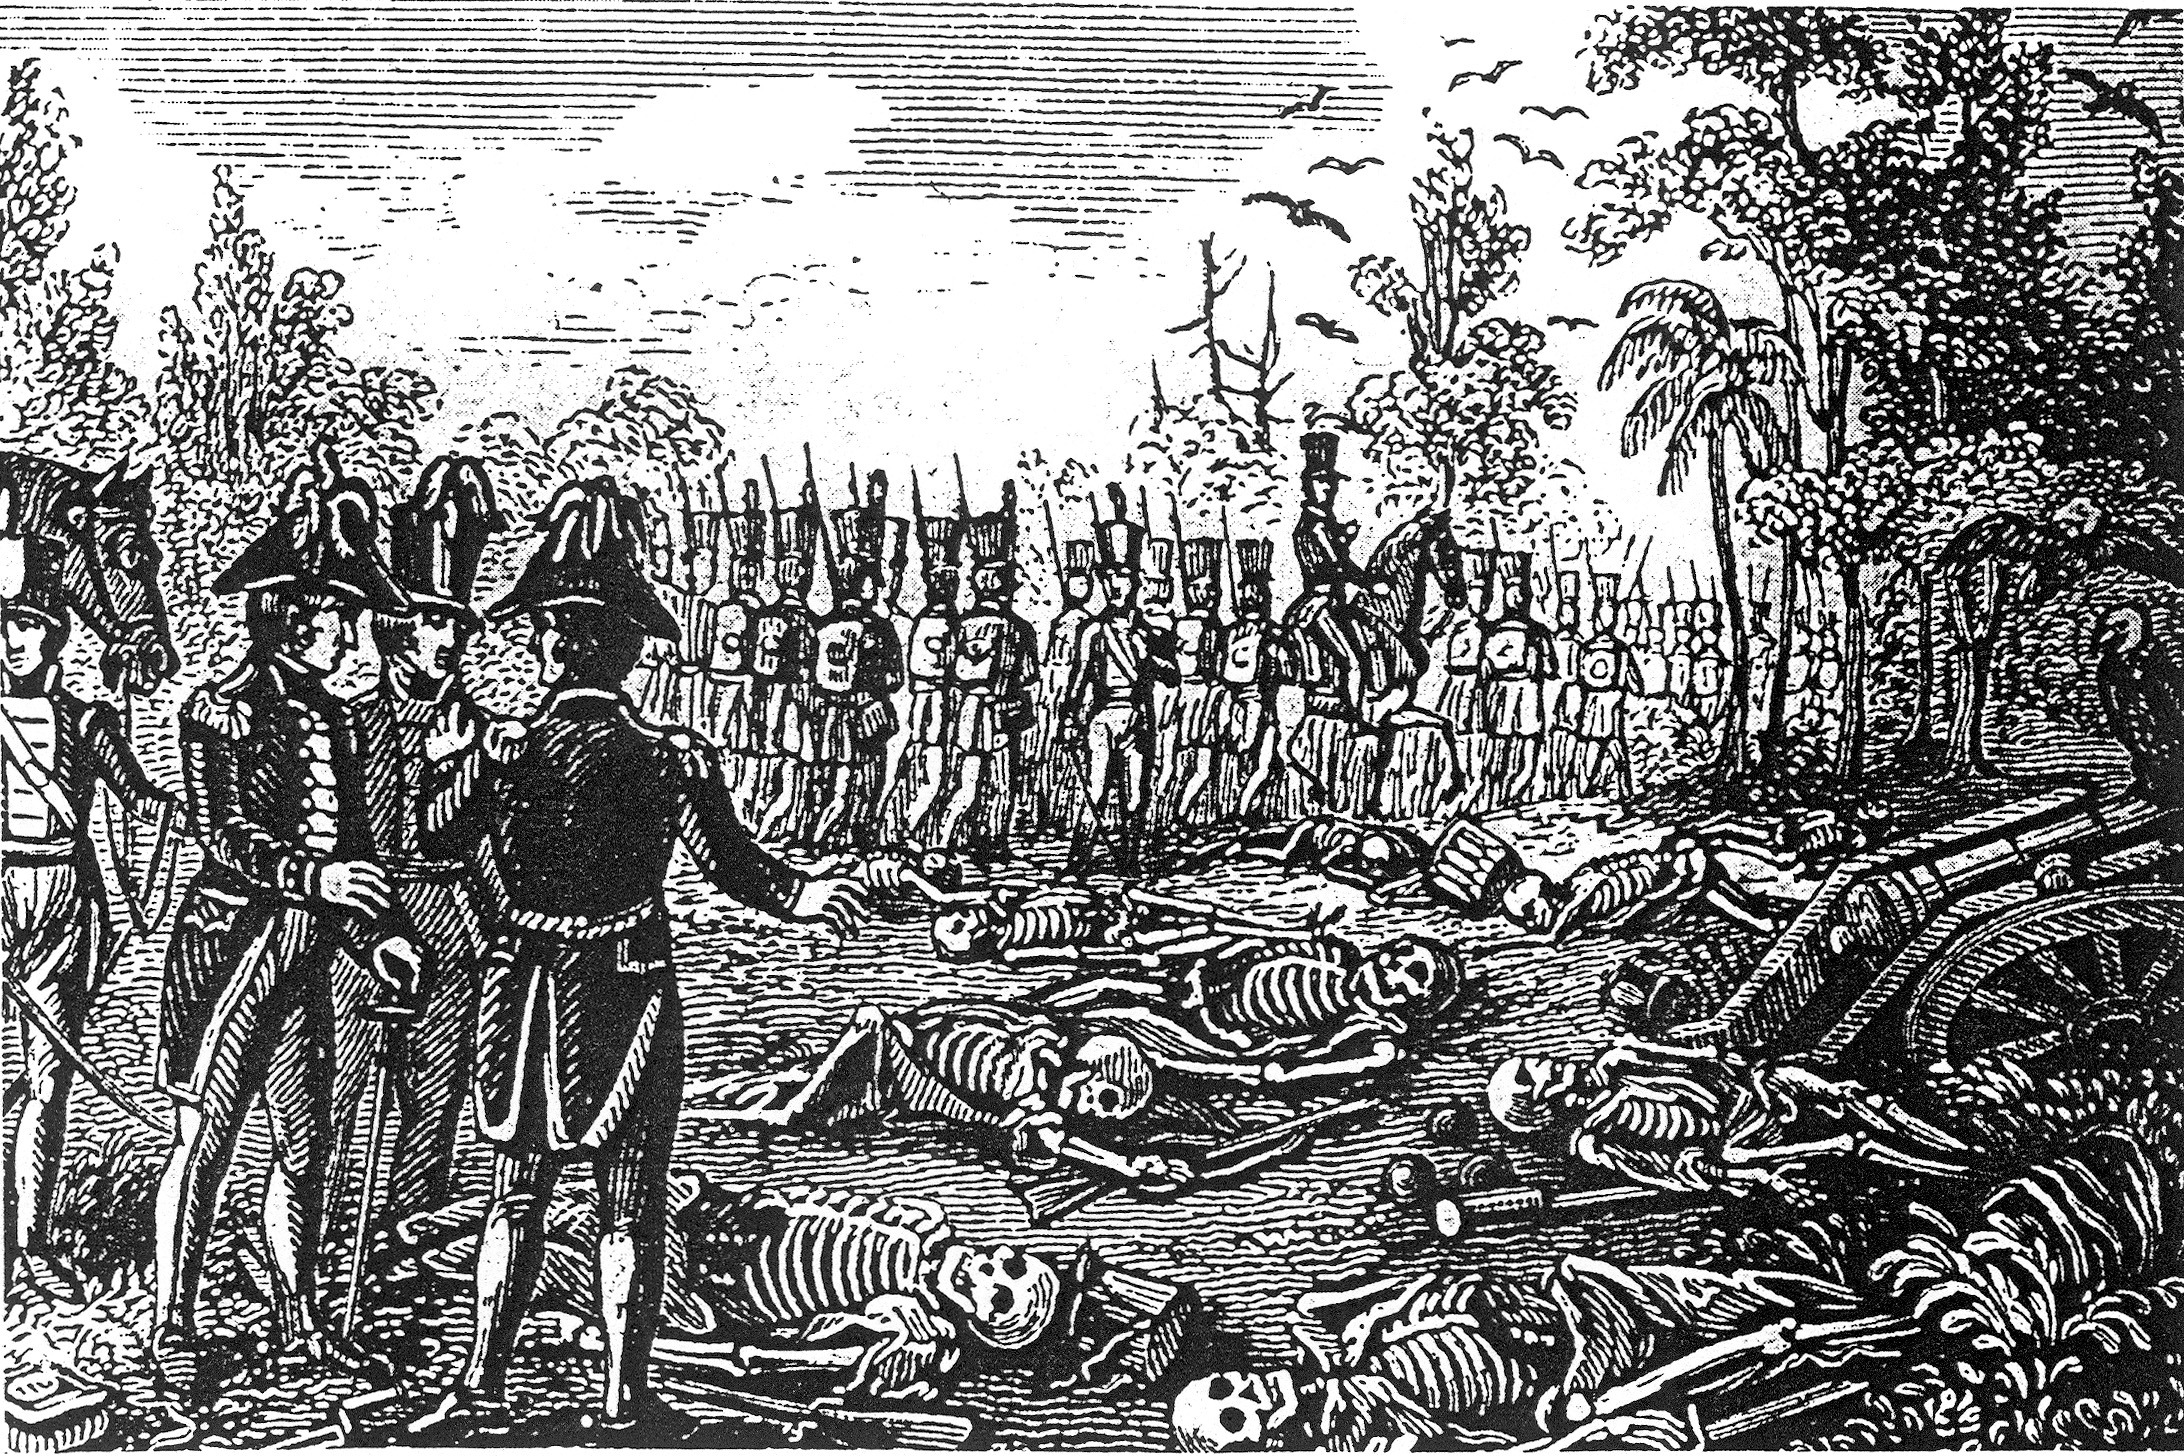 Six weeks after the battle, General Gaines marched up the same route and found the remains of Dade and his men. He buried the soldiers in a military ceremony and continued on to reinforce Fort King.